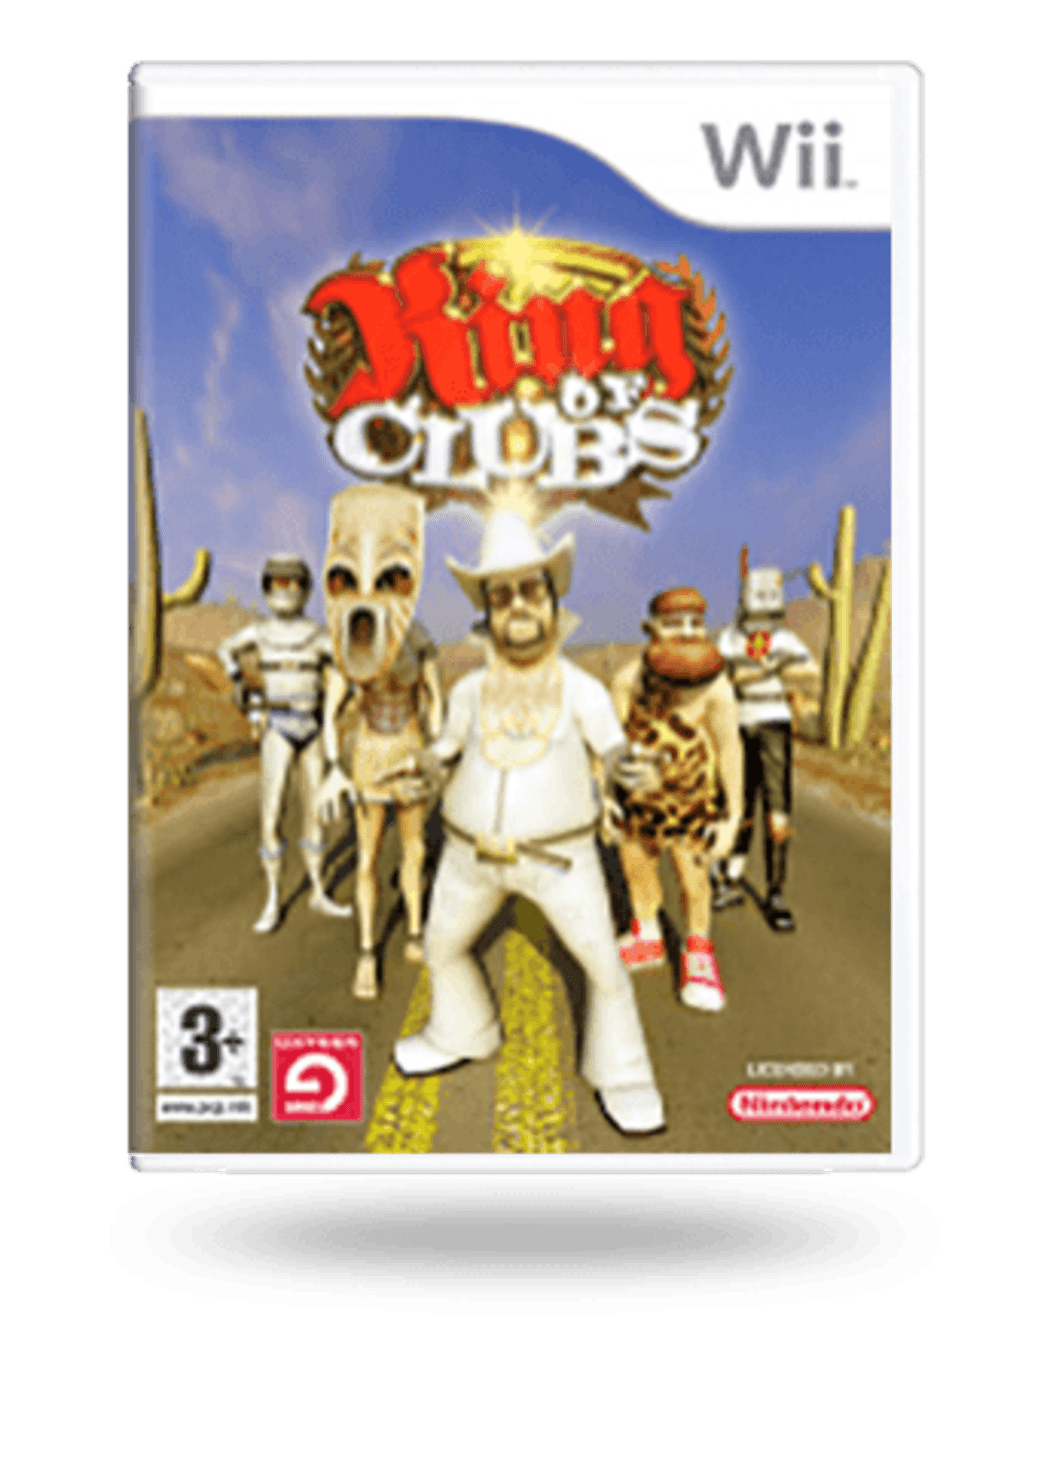 Nintendo king. Club Nintendo Colombia. Wii Pitfall: the big Adventure. King of Clubs (Wii).